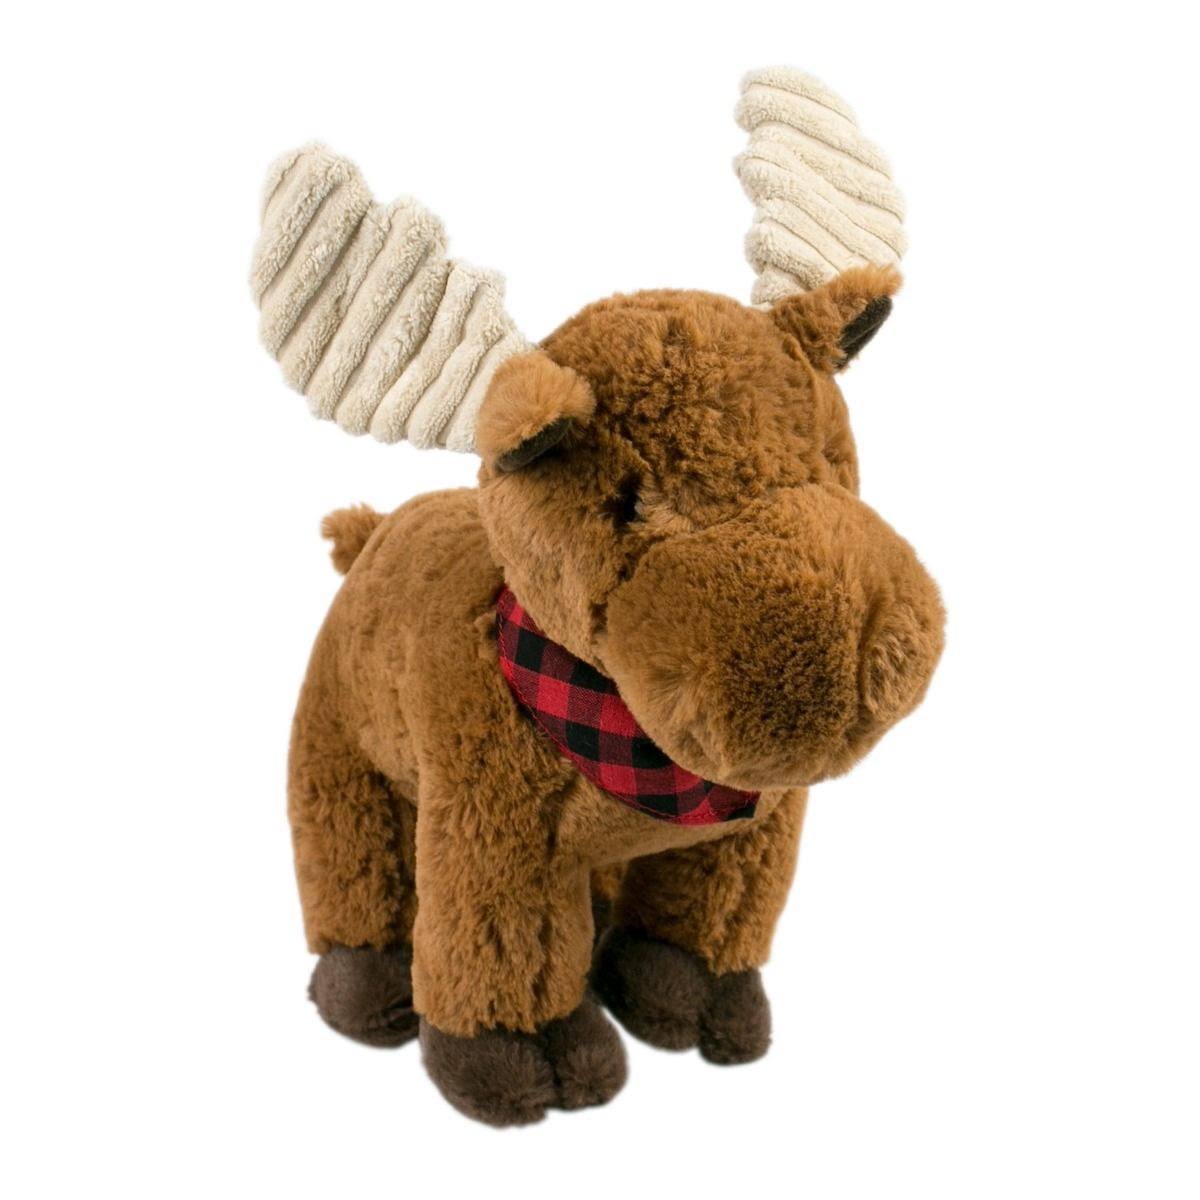 Tall Tails Crunch Moose Plush Dog Toy, 11"